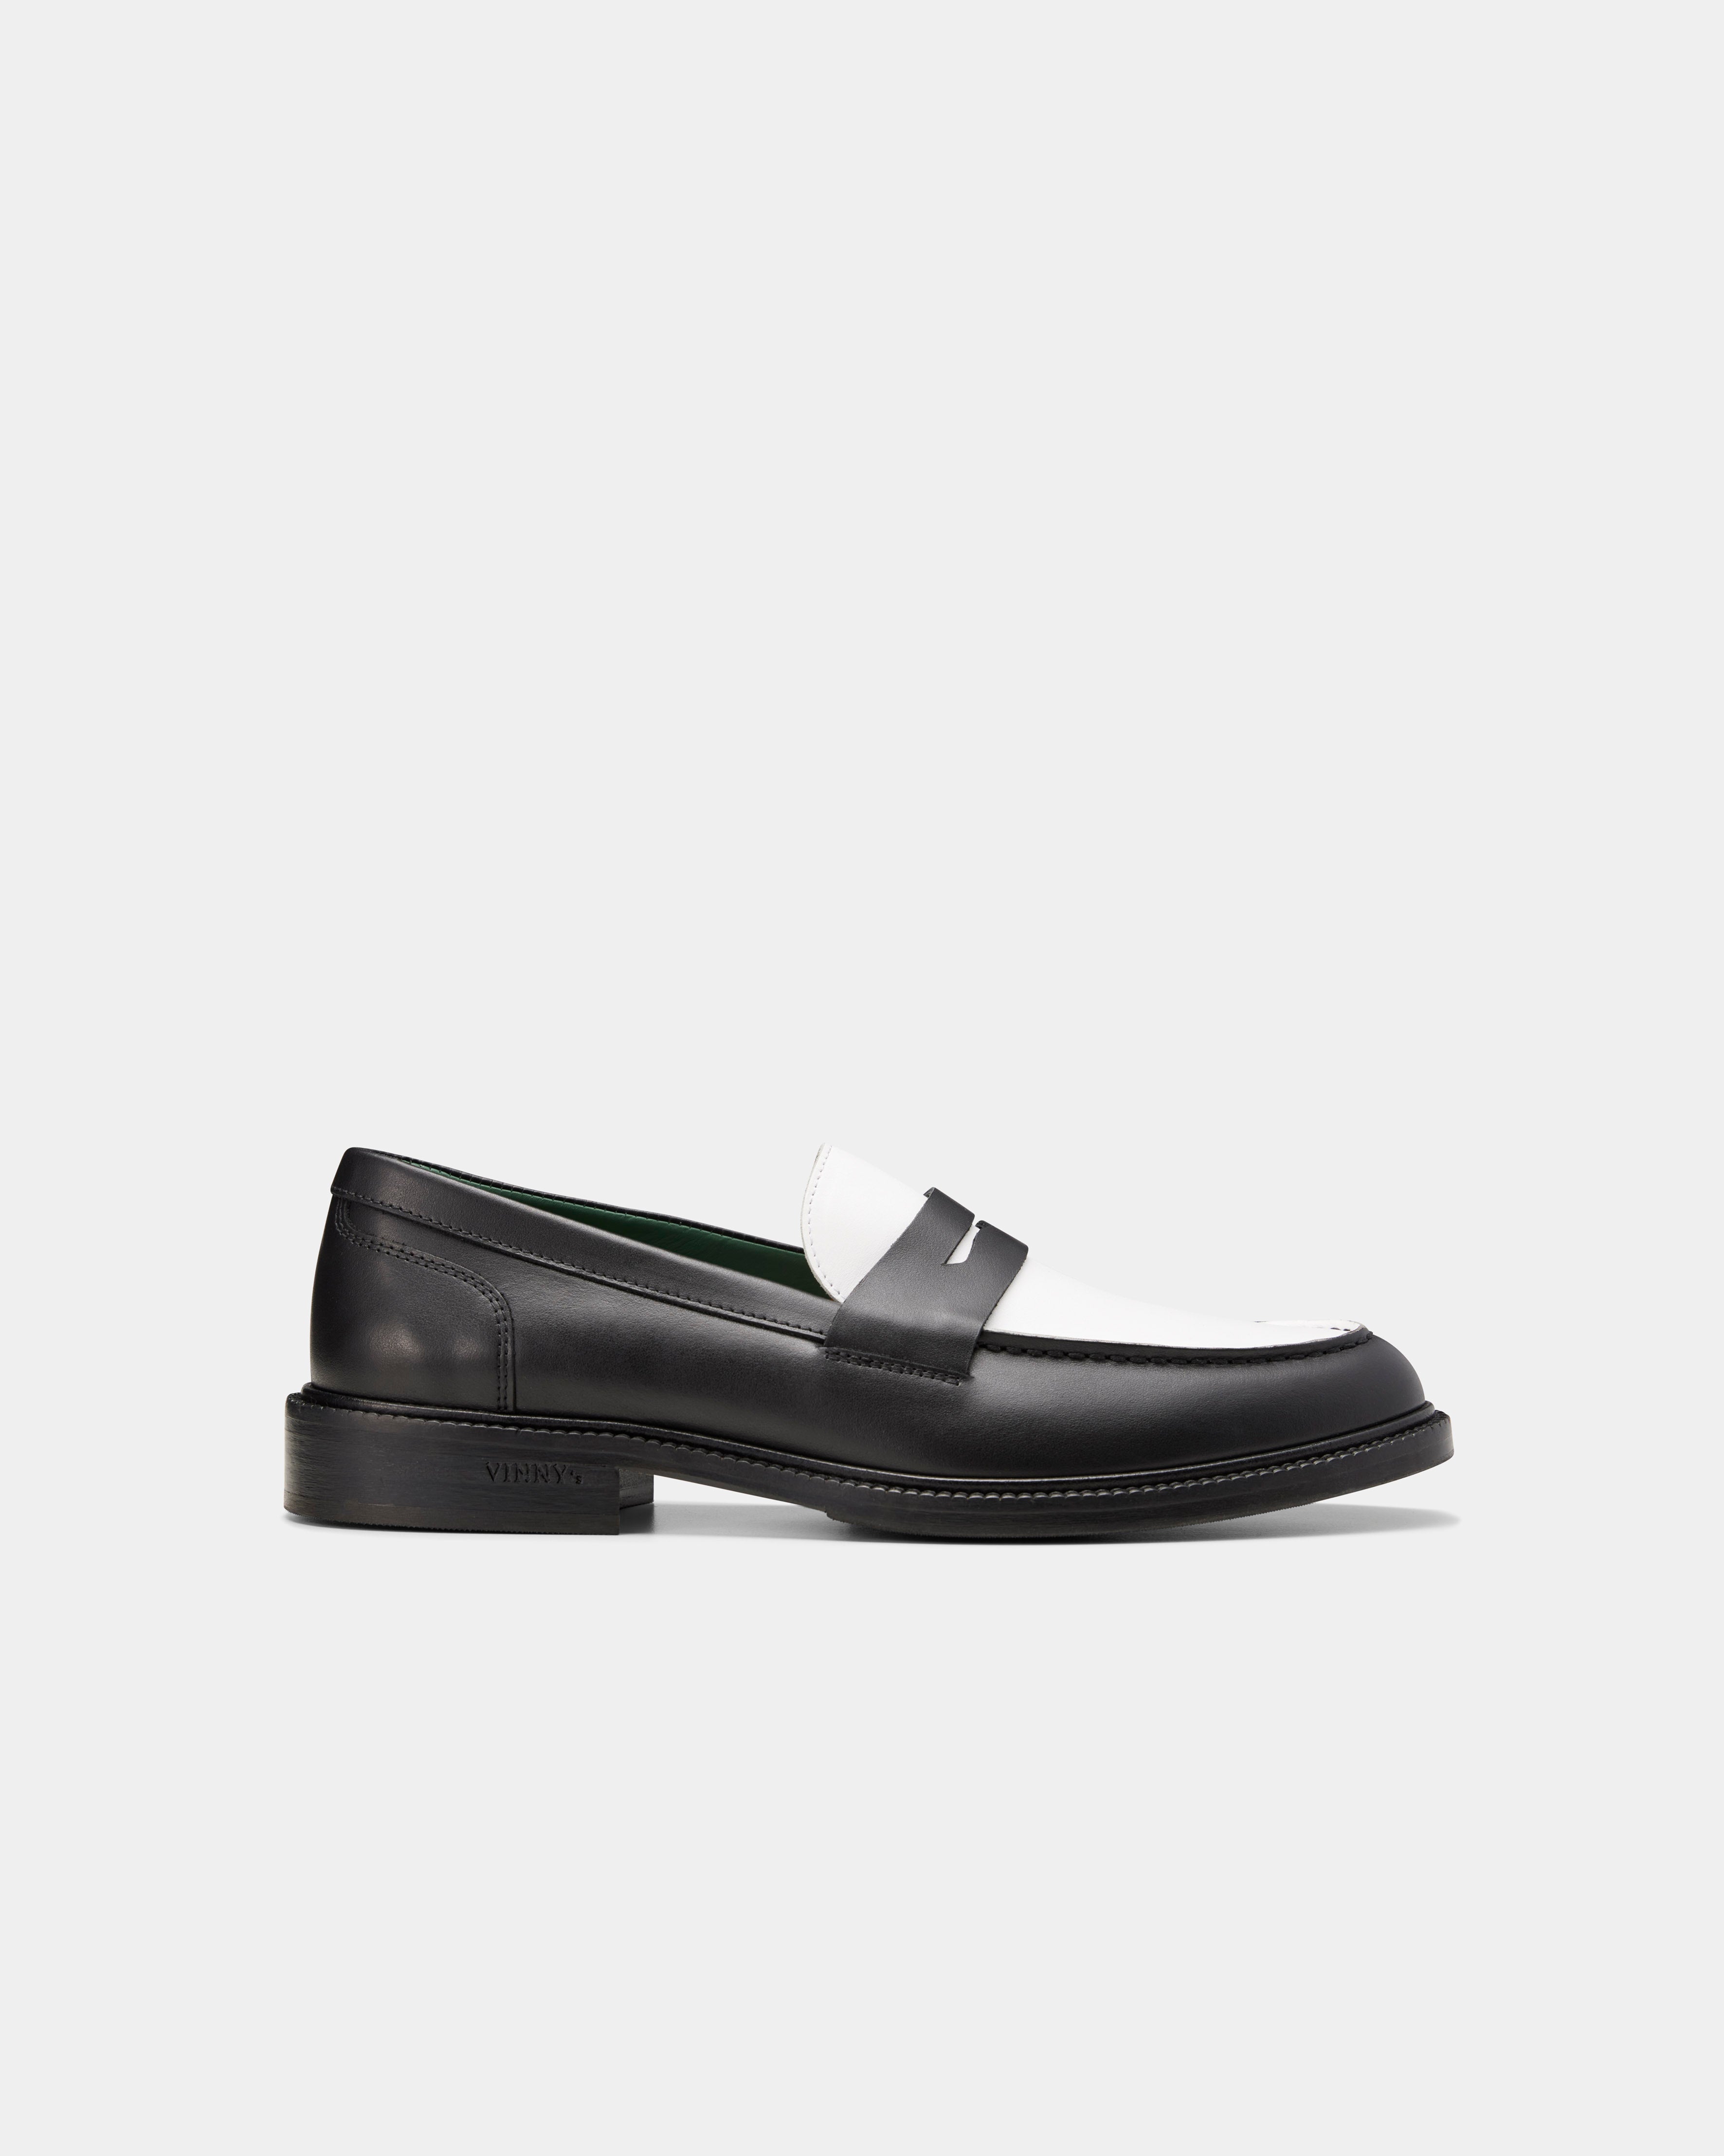 Women's loafers - Townee Two-Tone In Black And White - VINNY's